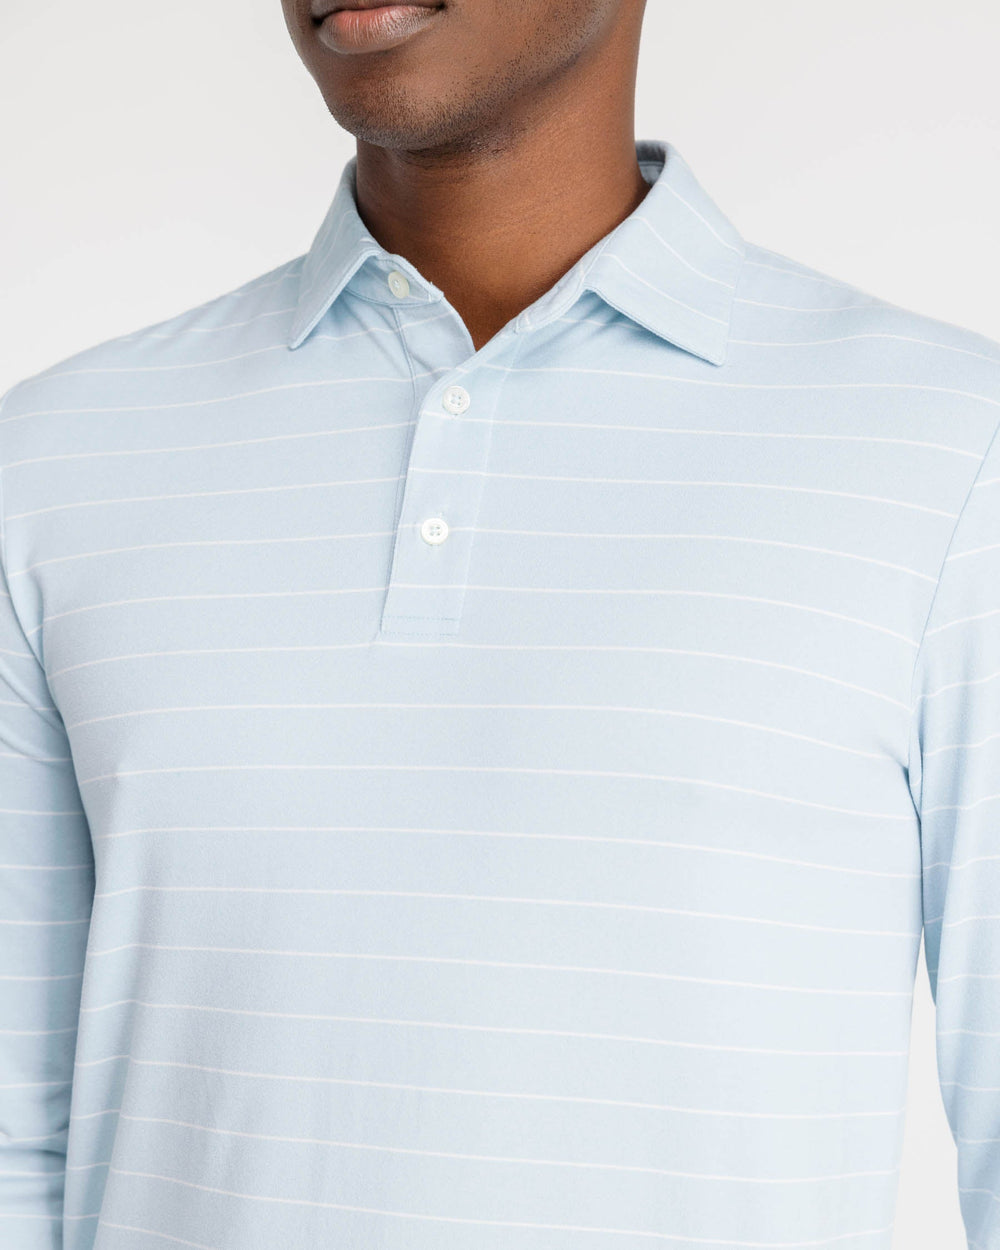 The detail view of the Ryder Bartlett Stripe Performance Polo Shirt by Southern Tide - Heather Aquamarine